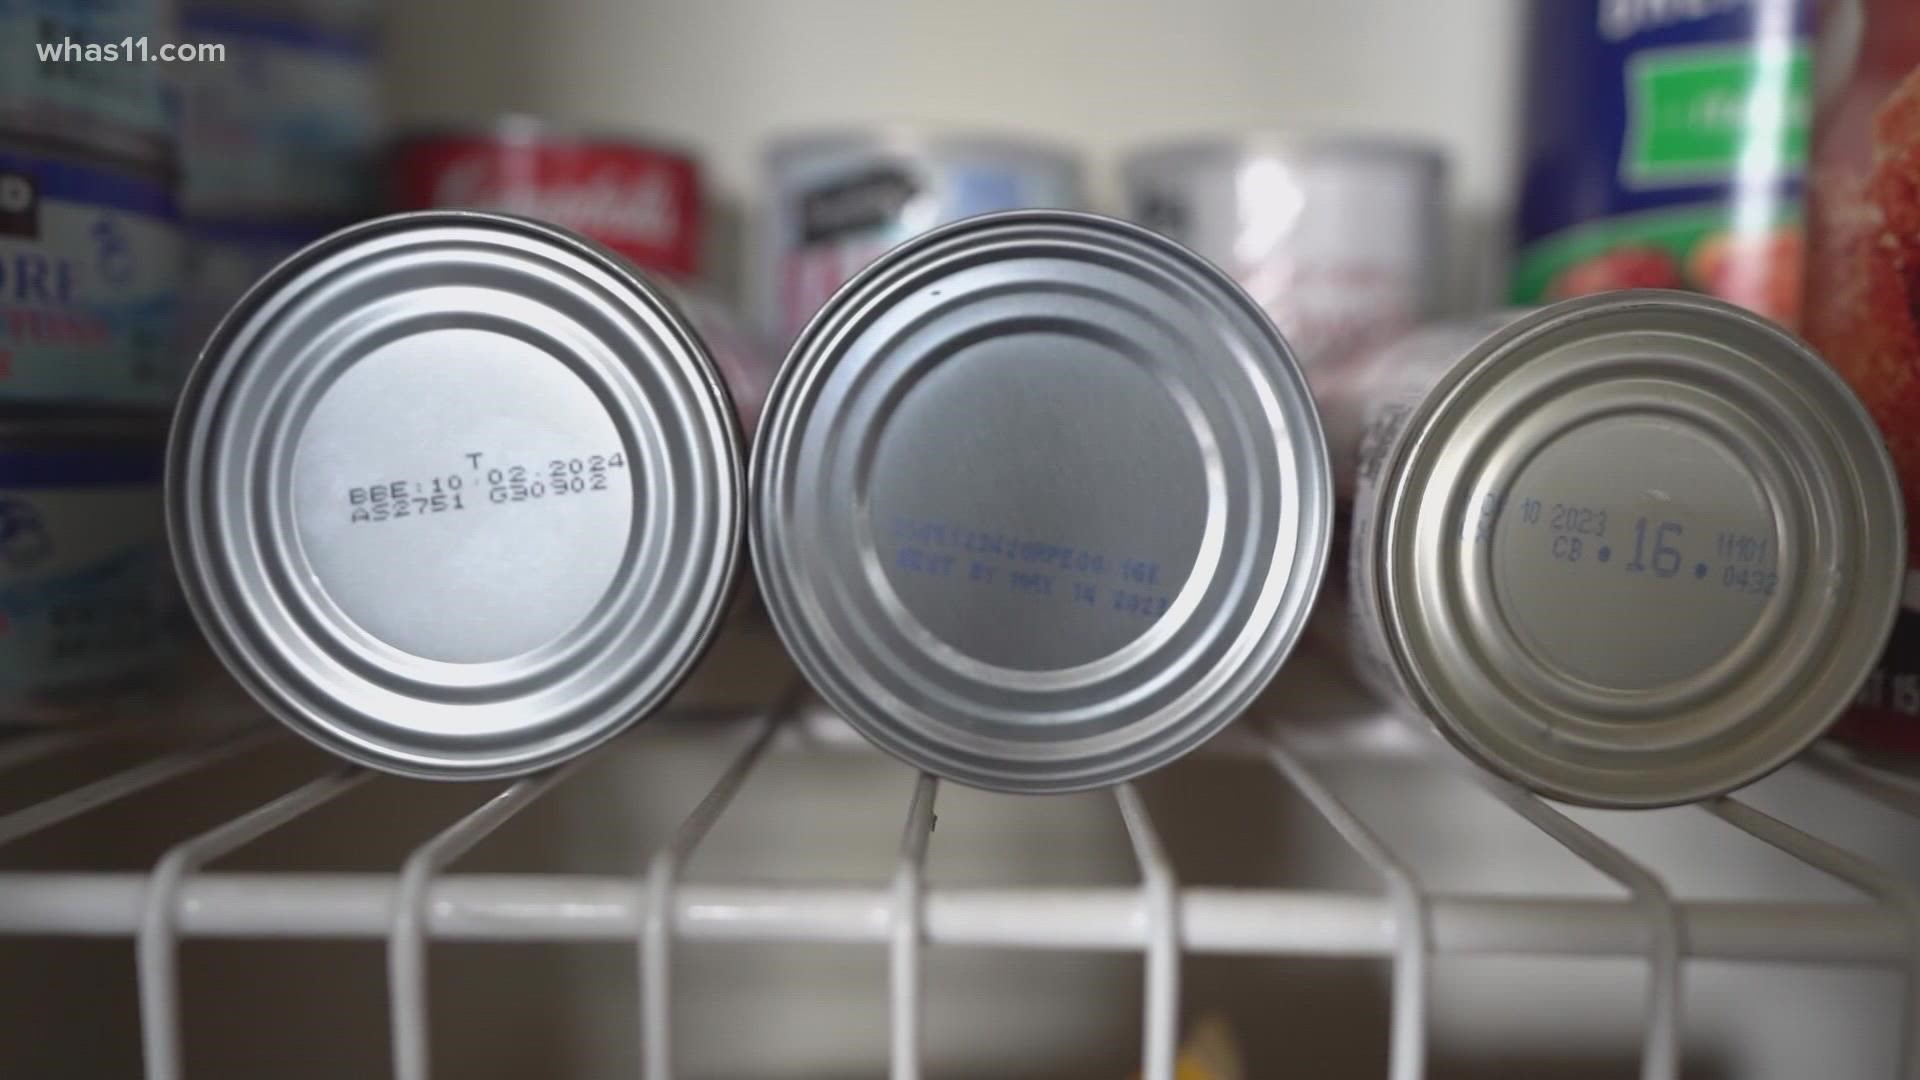 Most canned foods are safe to eat beyond the “use by” date as long as they’re stored in a cool, dry place and remain in good condition, such as no dents or swelling.